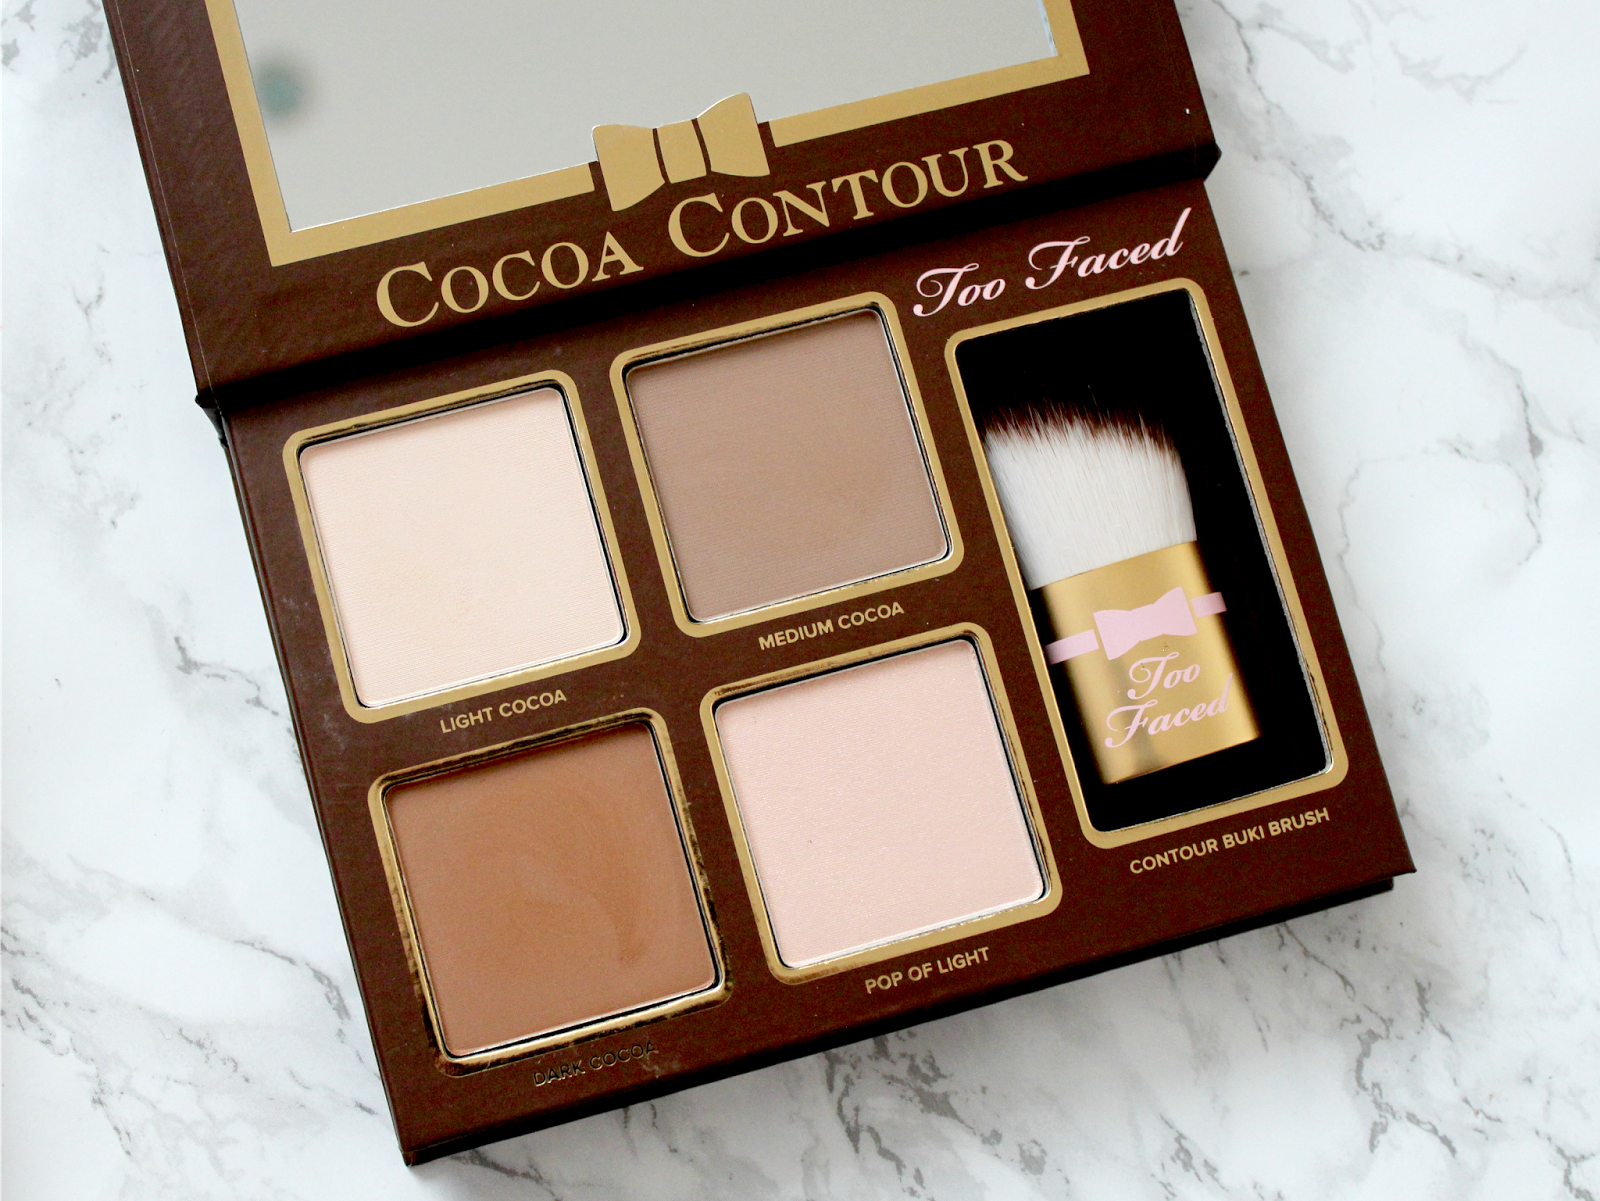 Too Faced Cocoa Contour Palette Review | Couture Girl